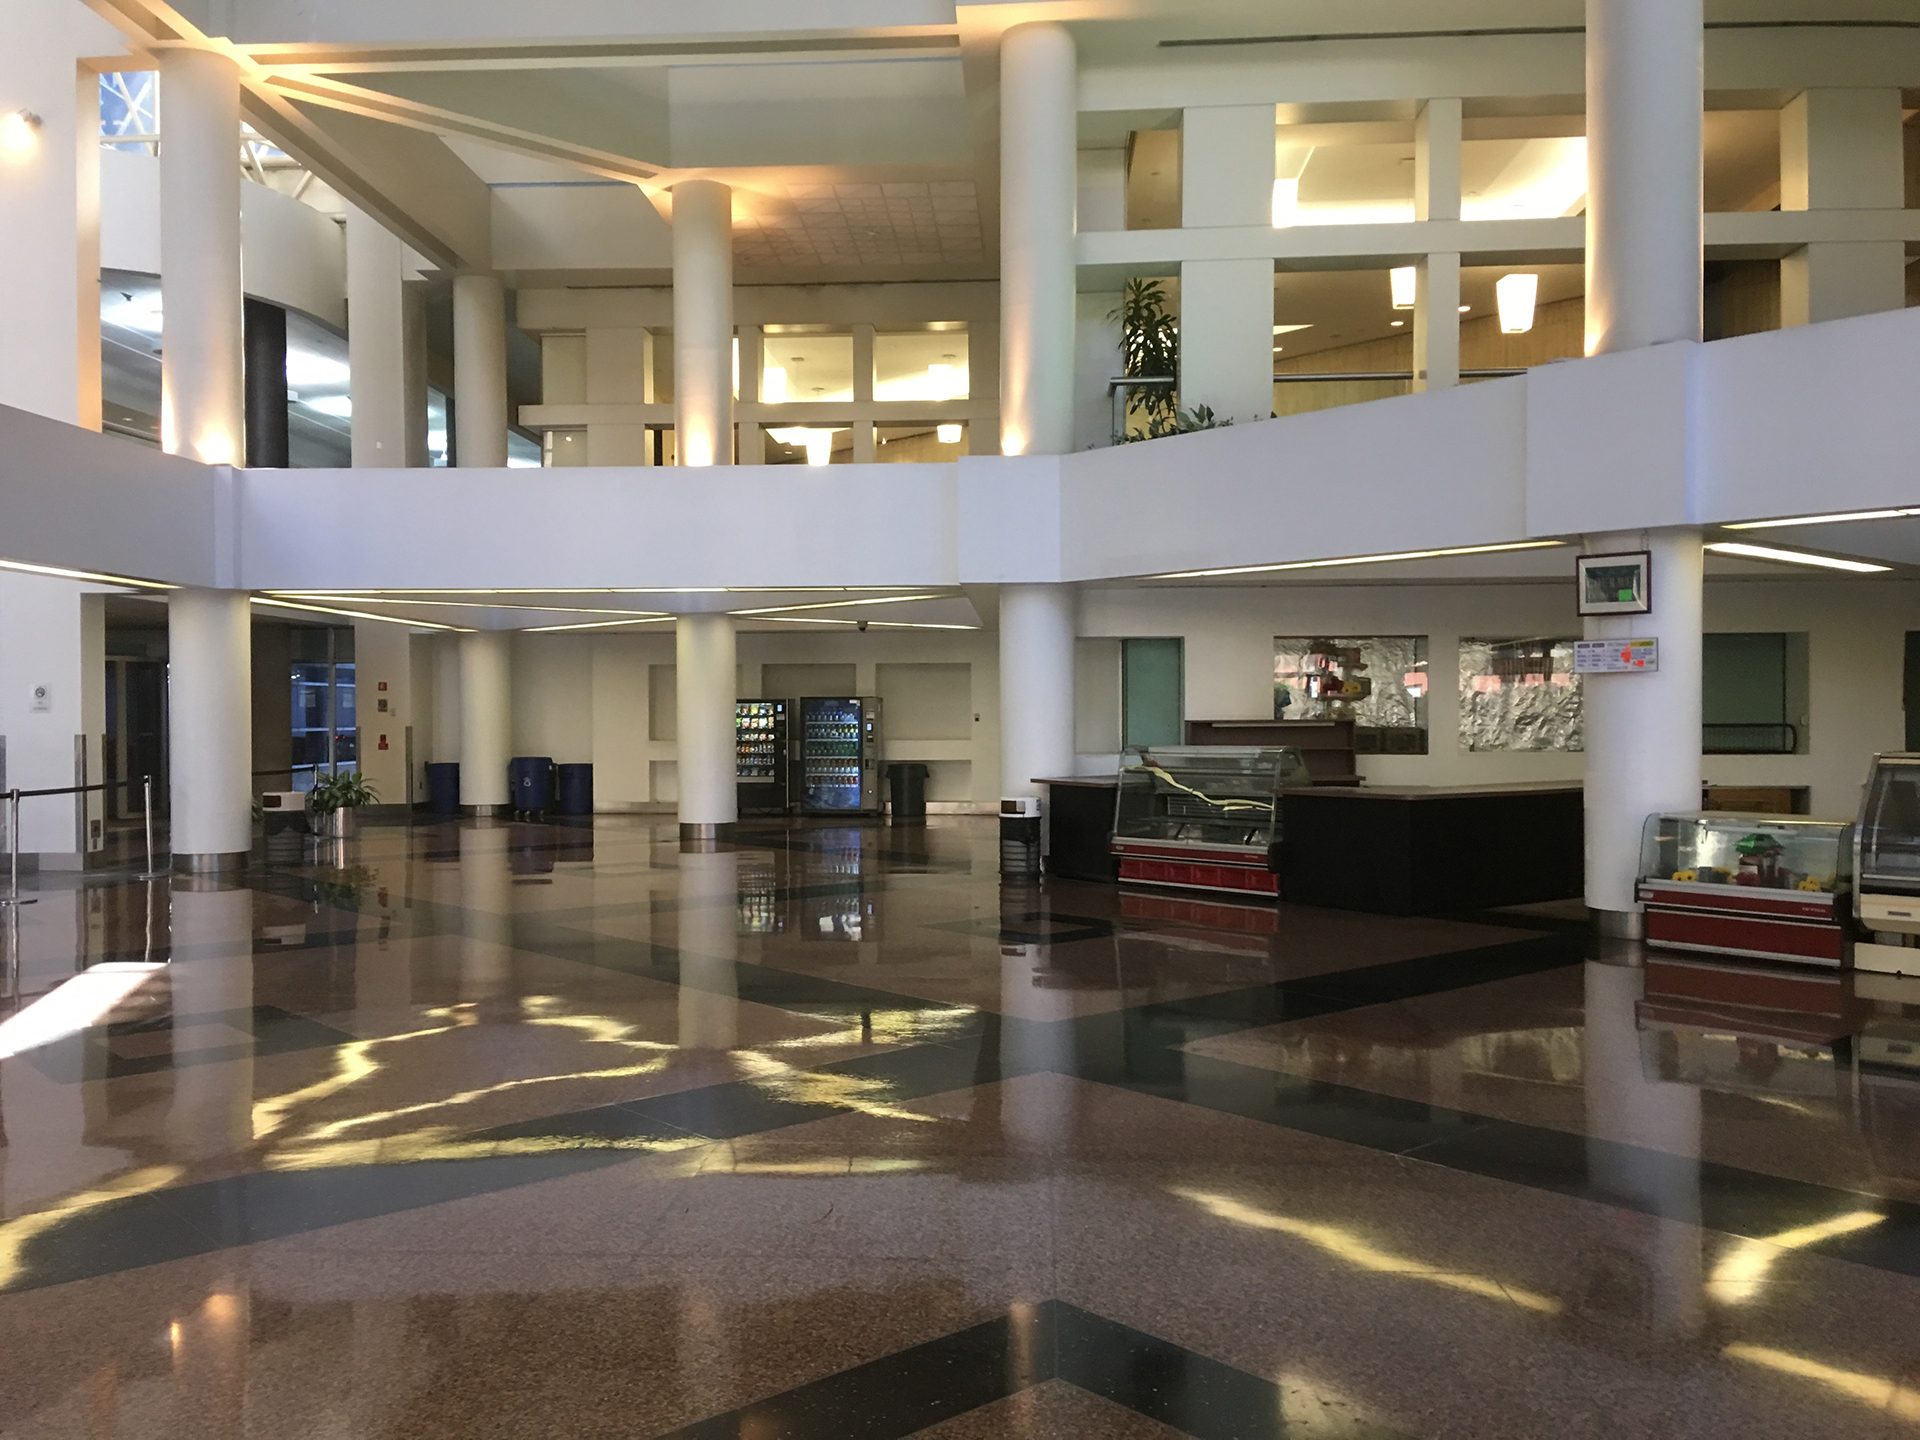 Existing building lobby at 4 Gateway Center